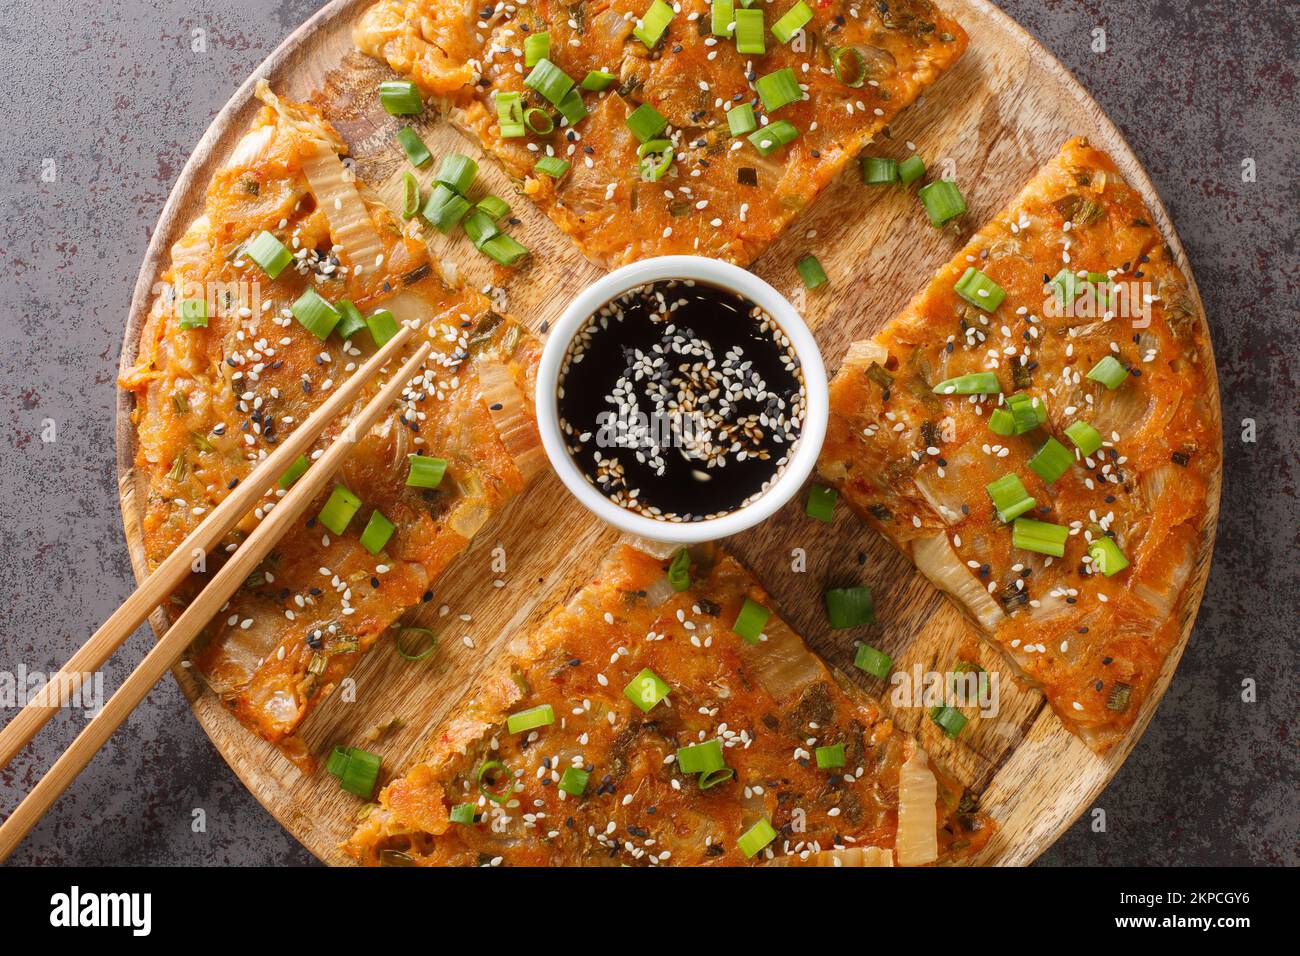 Kimchi-buchimgae or kimchijeon made with sliced kimchi, flour batter and sometimes other vegetables closeup on the wooden board on the table. Horizont Stock Photo